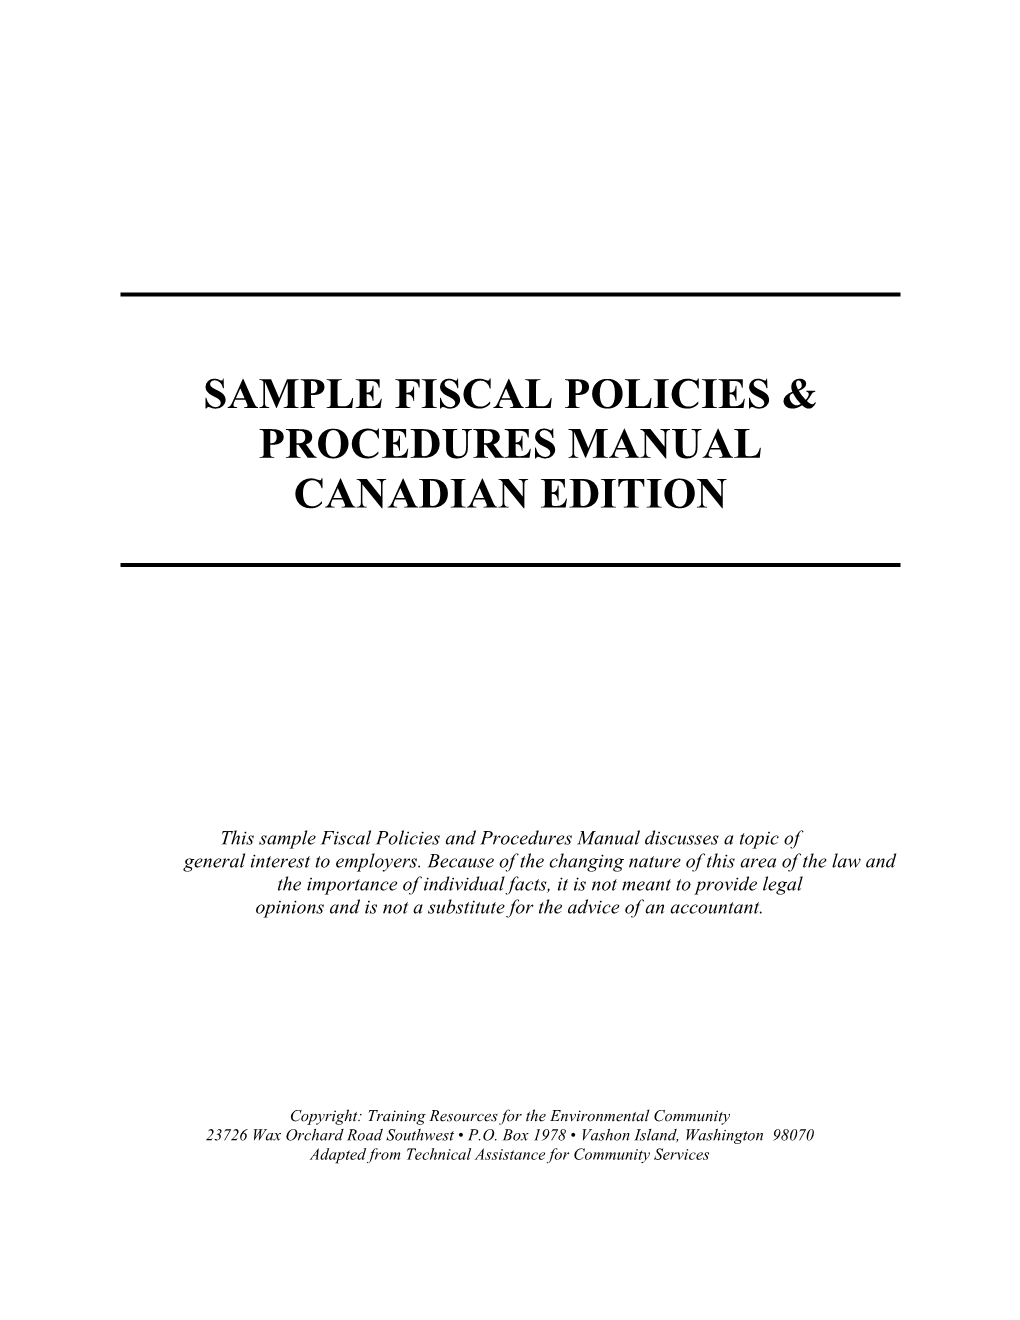 Draft Fiscal Policies and Procedures Manual